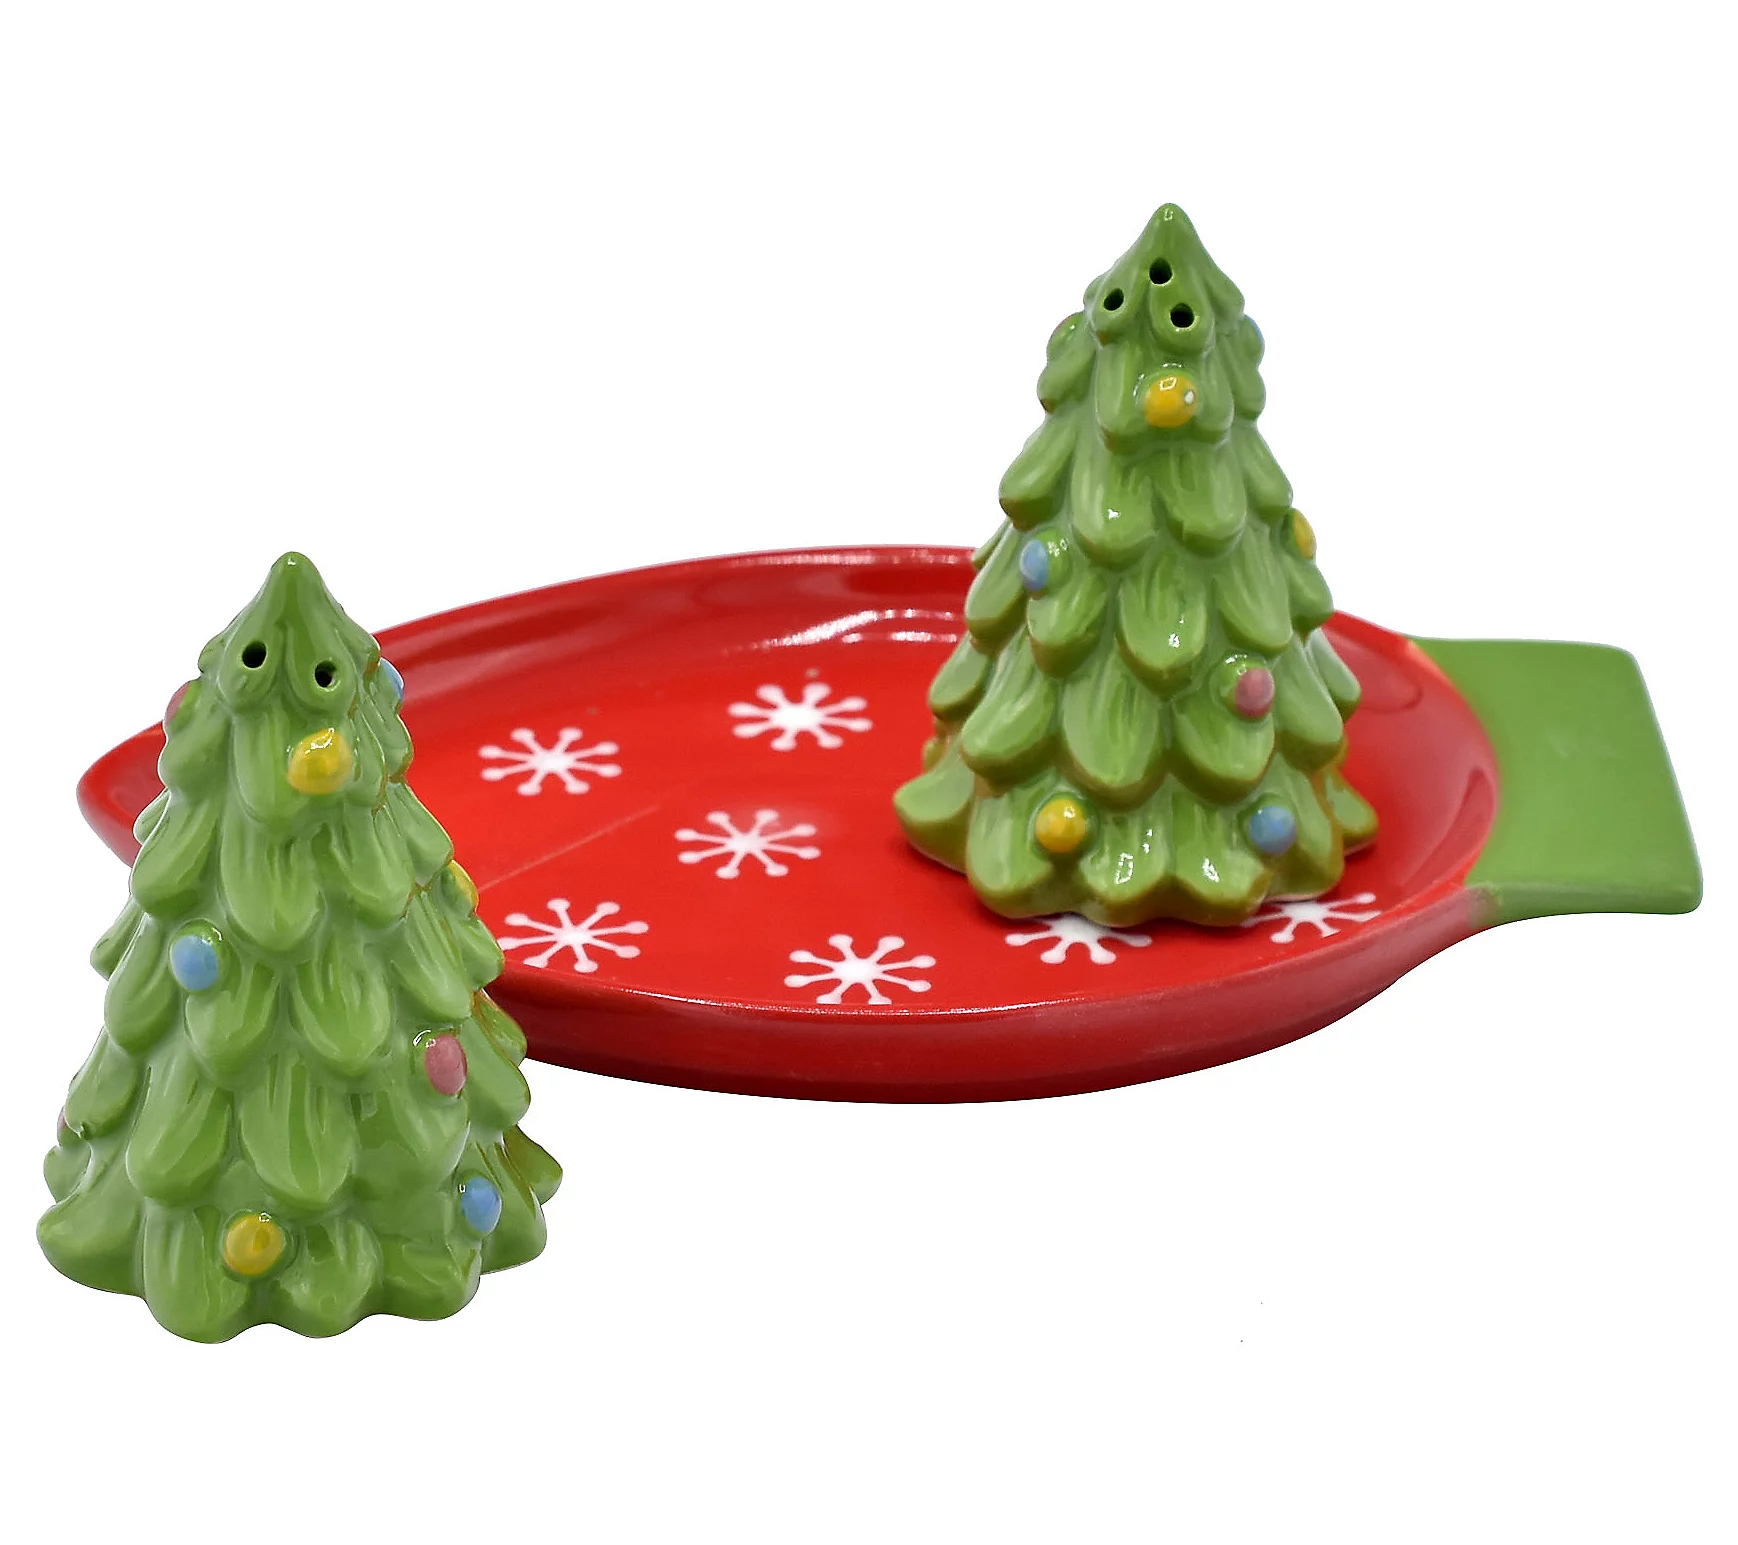 Temp-tations Figural Holiday Salt and PepperSet